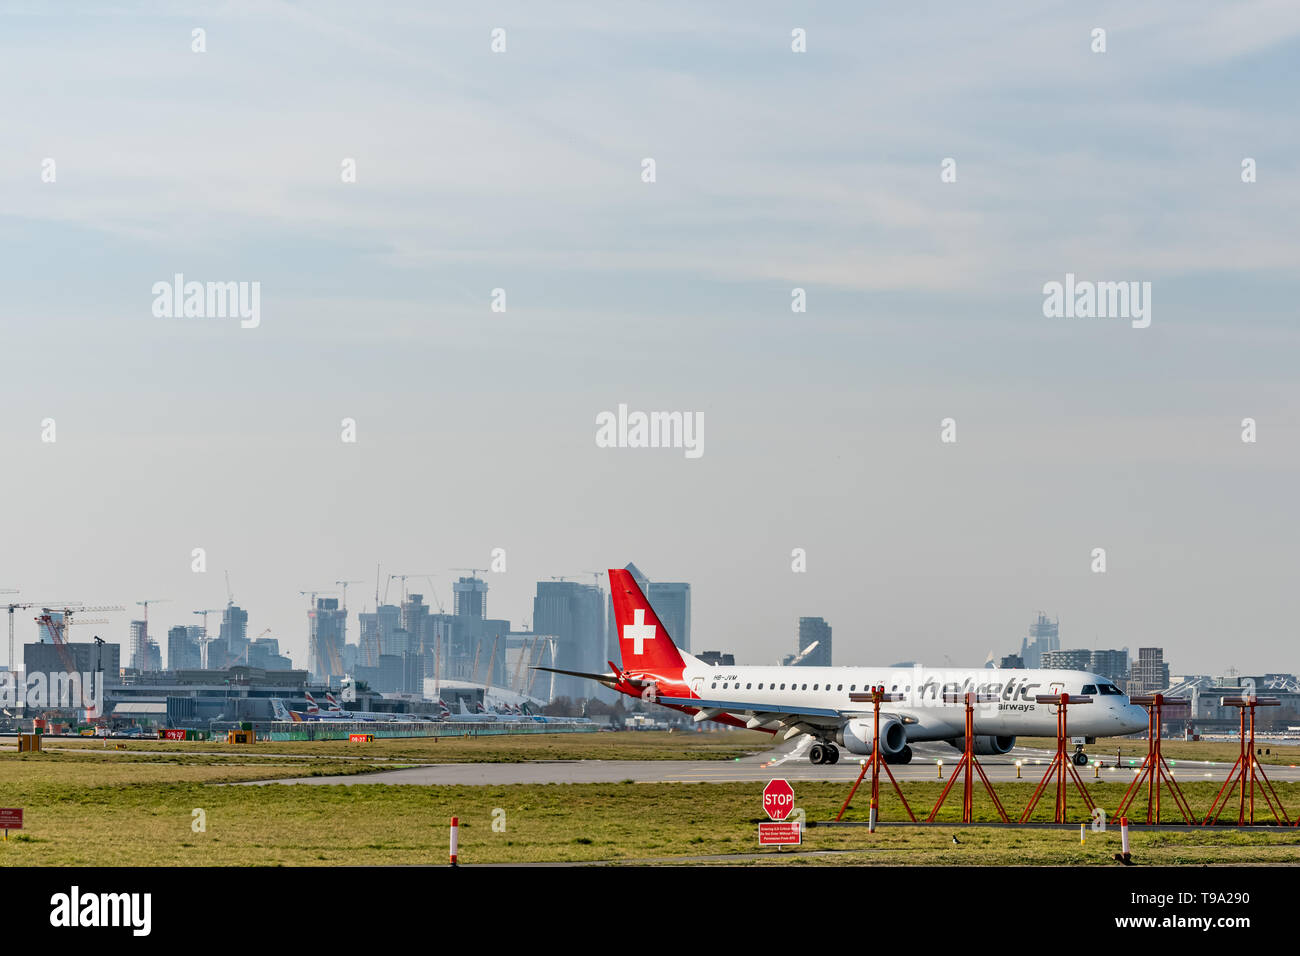 London, UK - 17, February 2019: Helvetic Airways airline based in Zurich Kloten, Switzerland. Aircraft type Embraer ERJ-190 at London City Airport. Stock Photo